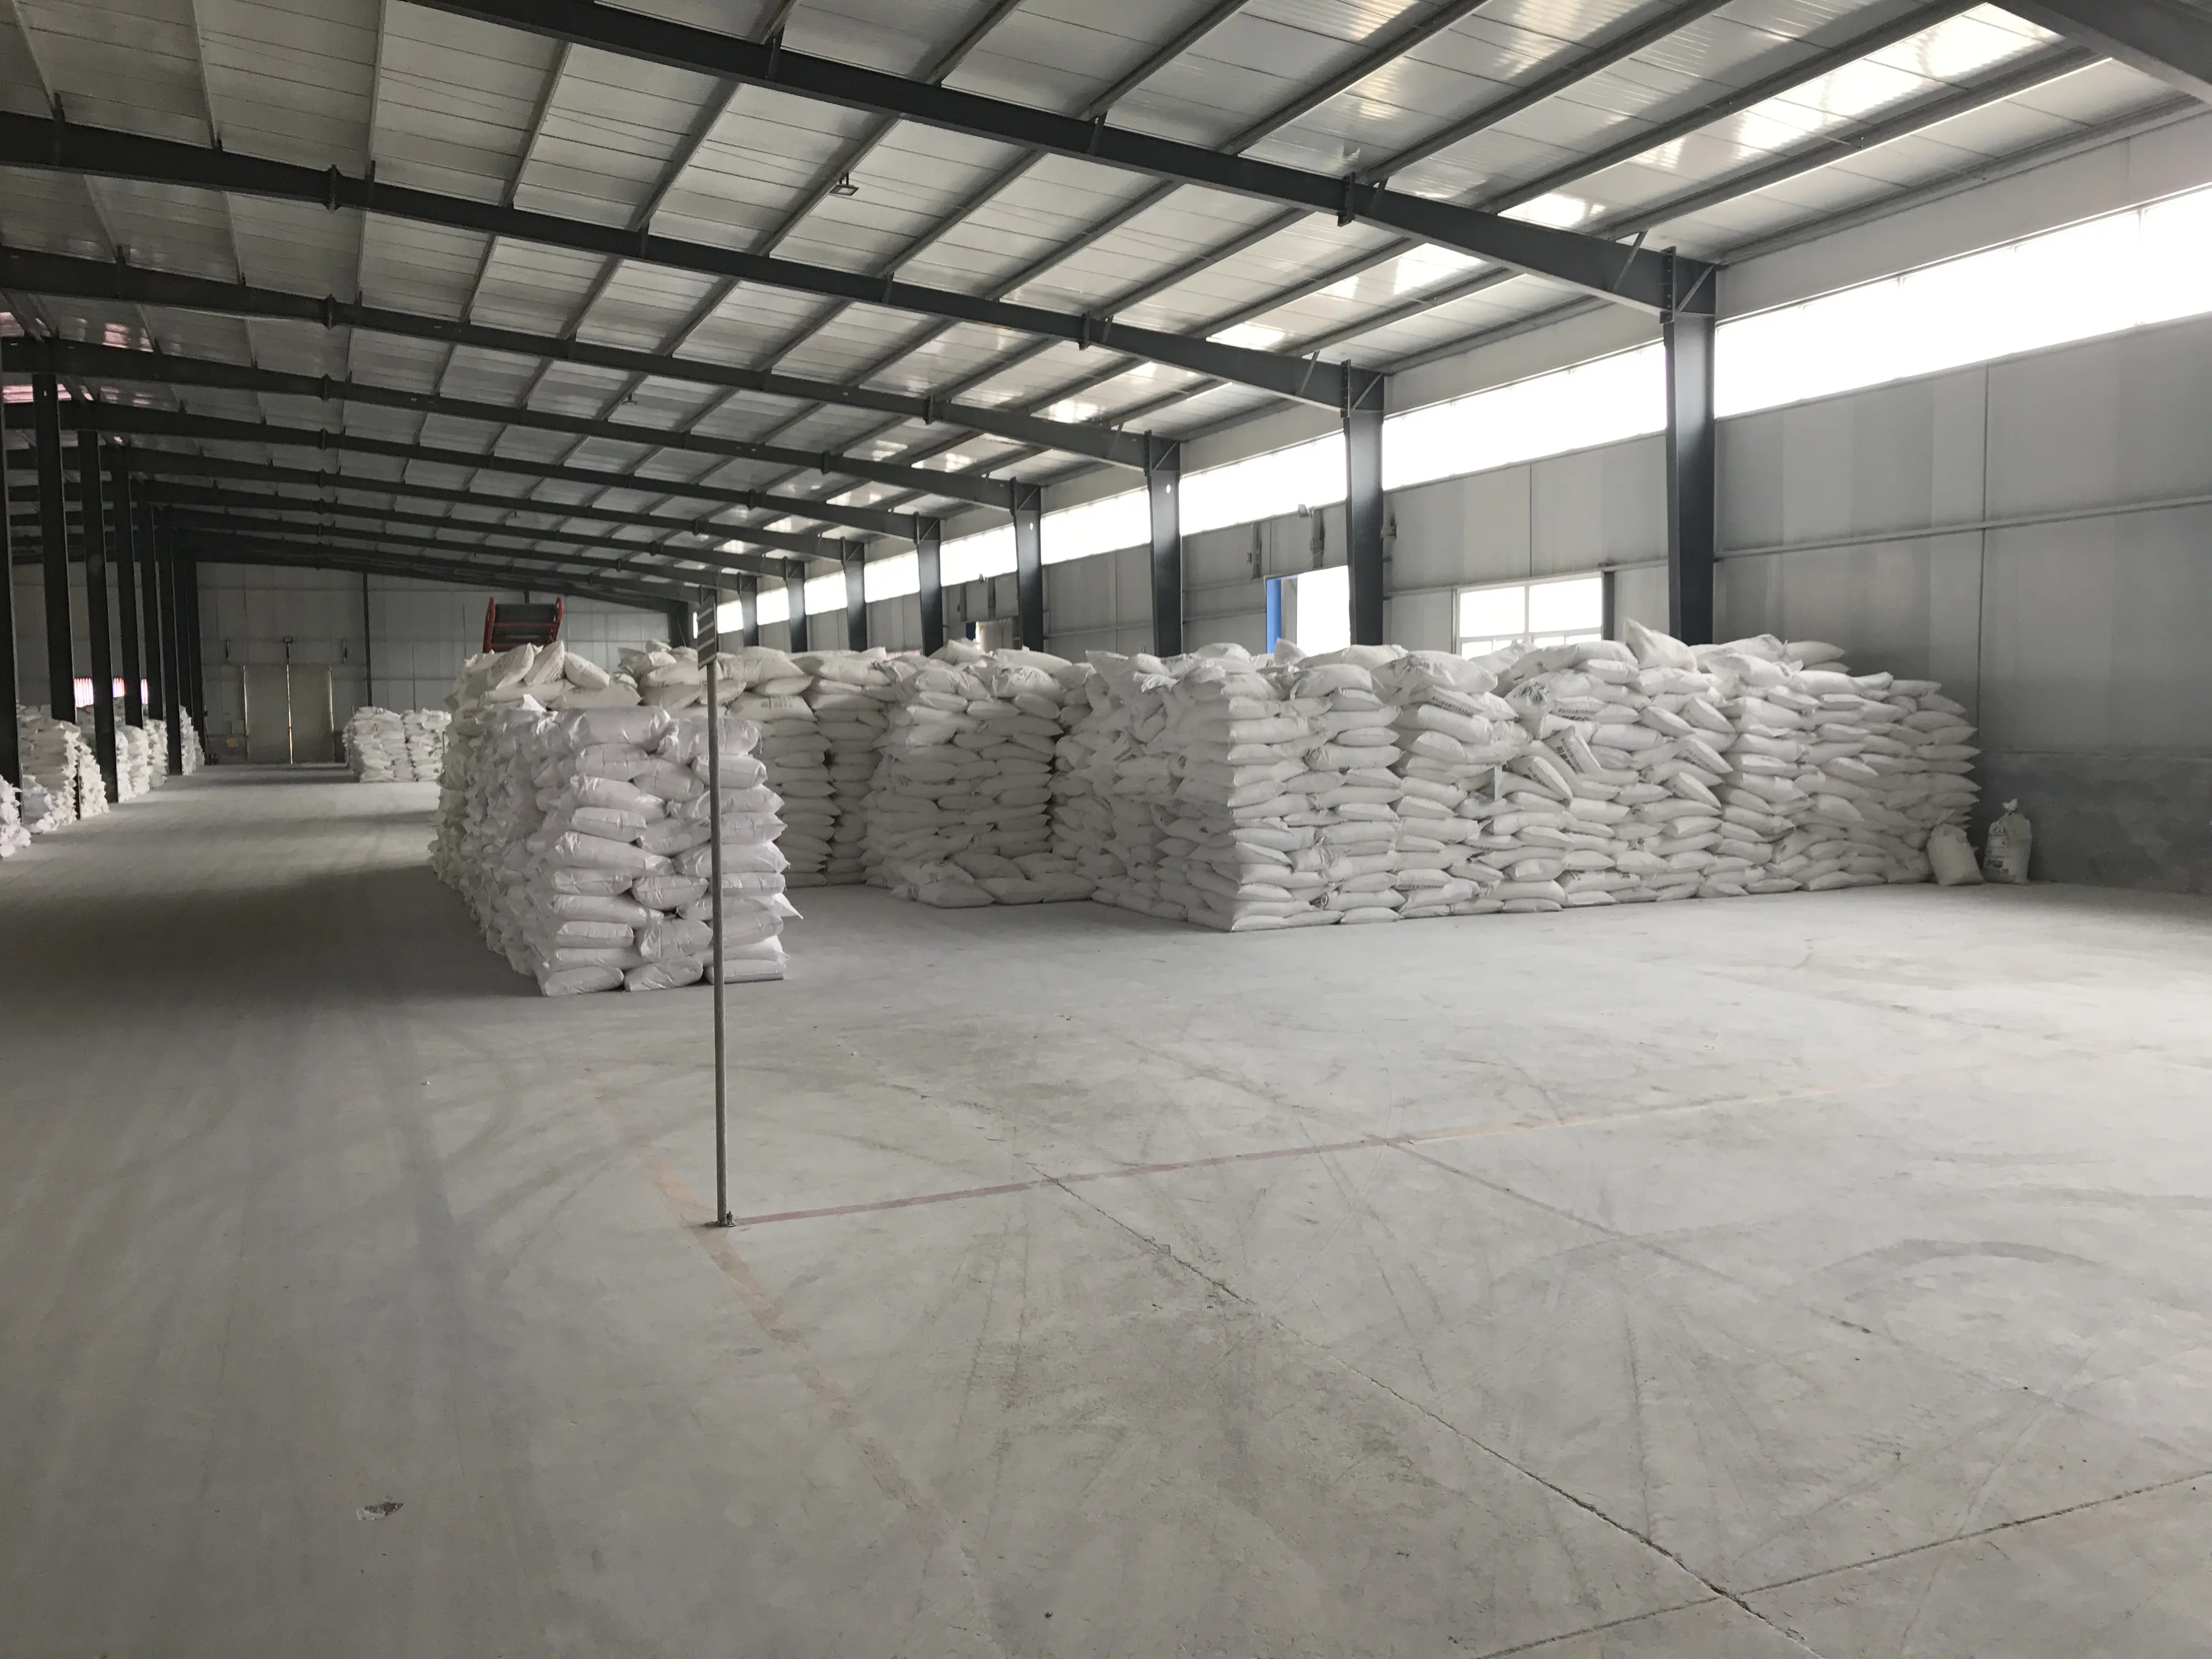 Hot sale Mgo price Calcined Magnesium Oxide Price mgo Powder 85% Magnesium Oxide